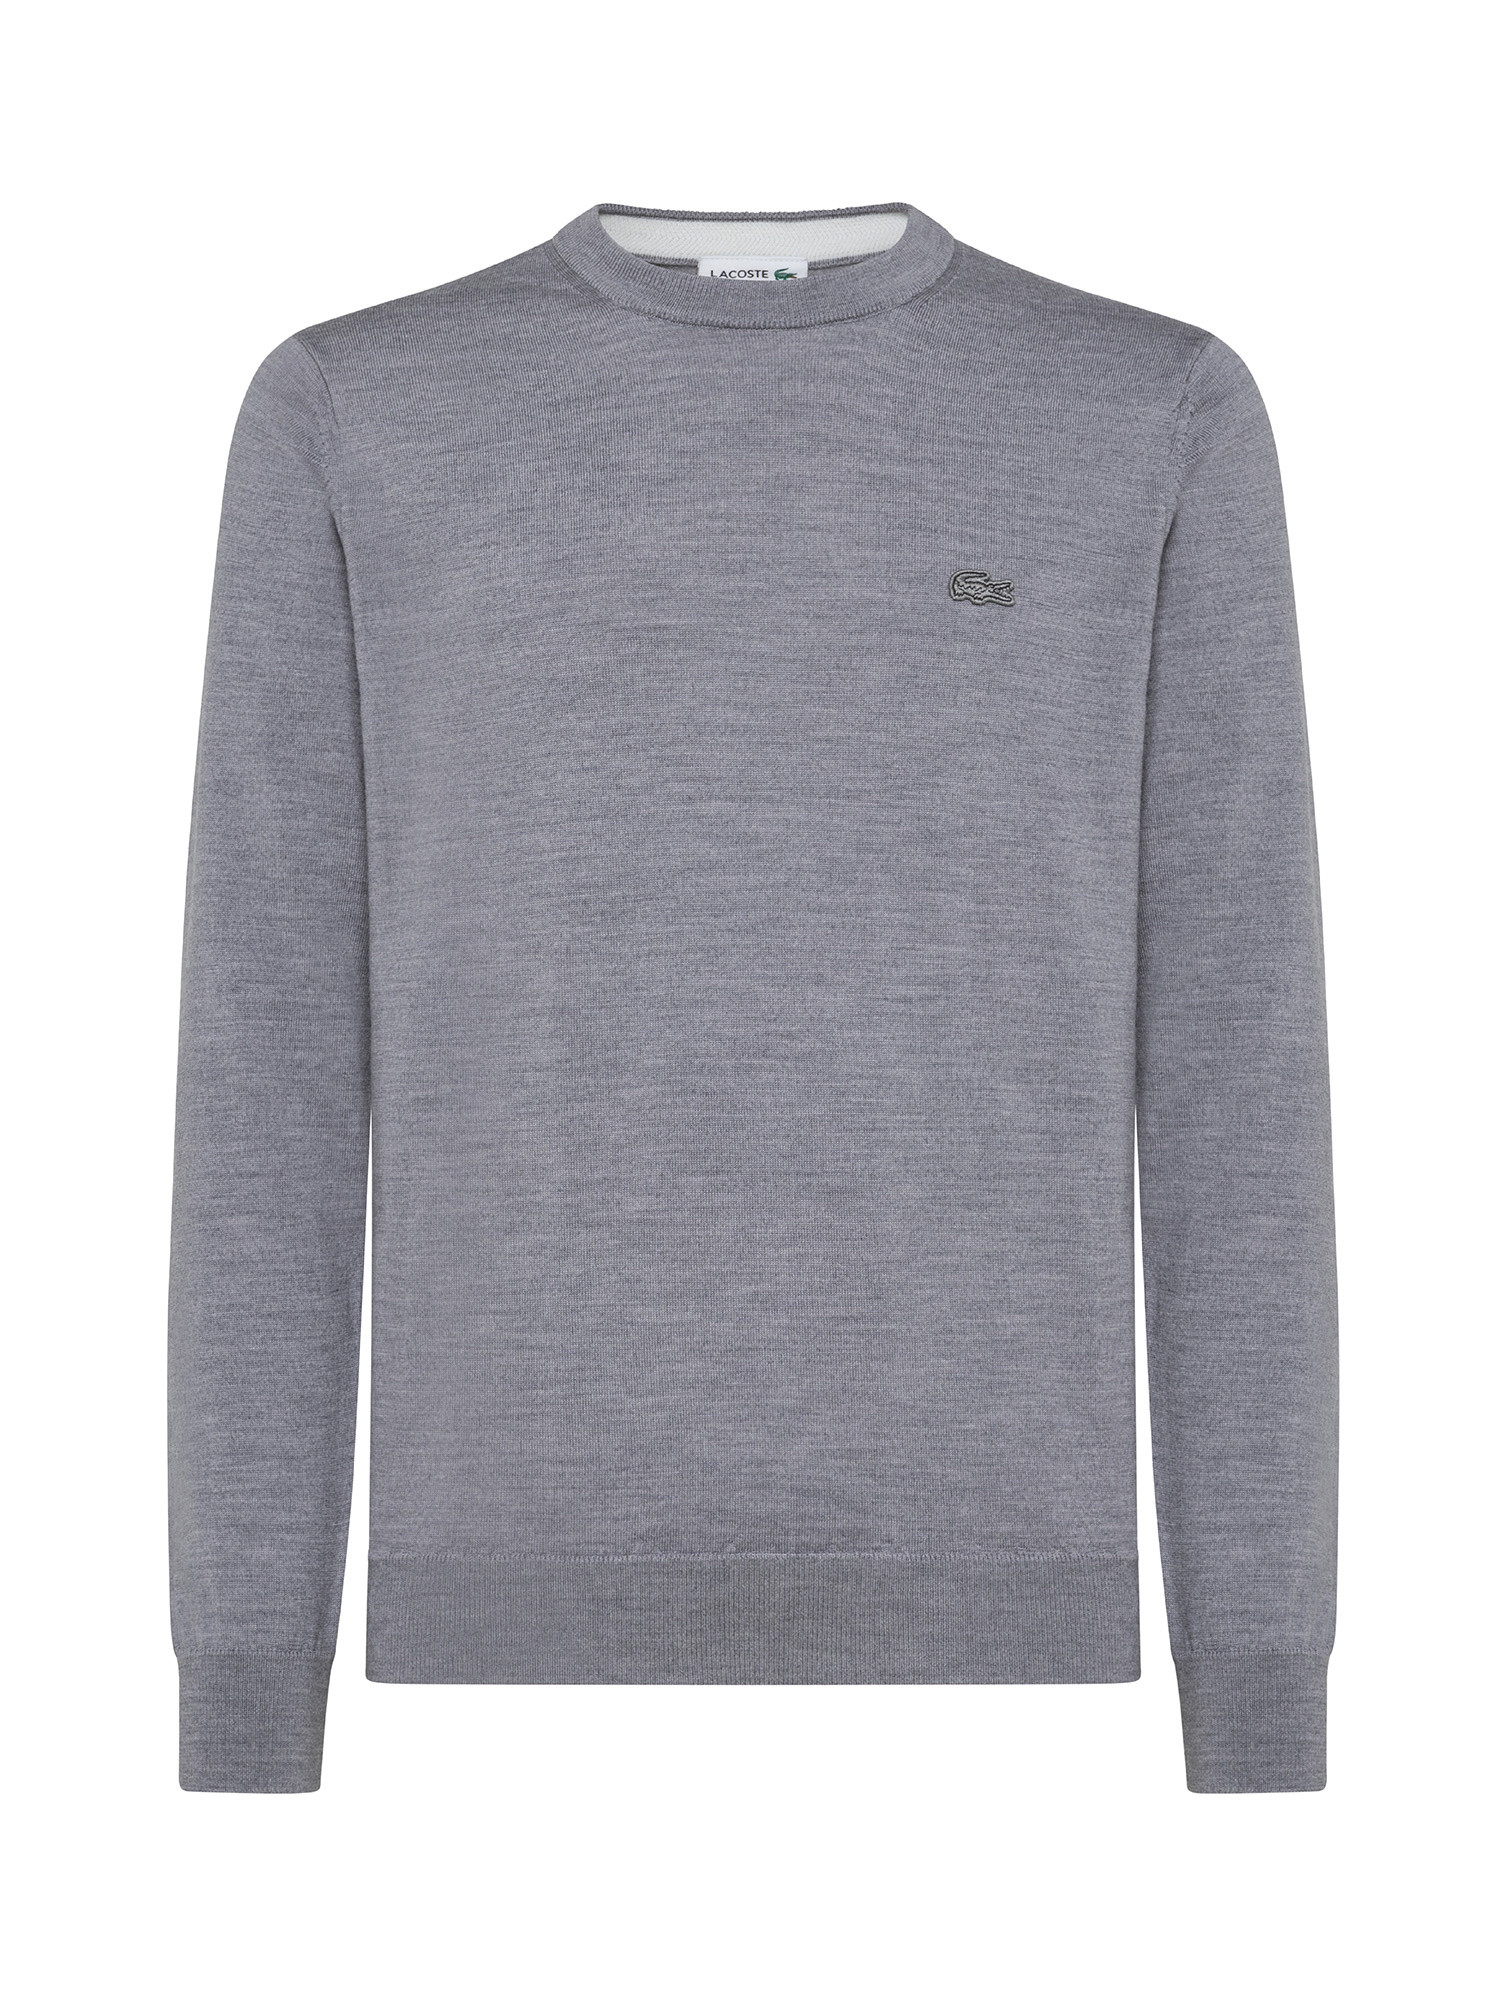 Lacoste - Merino wool pullover with round neck, Dark Grey, large image number 0